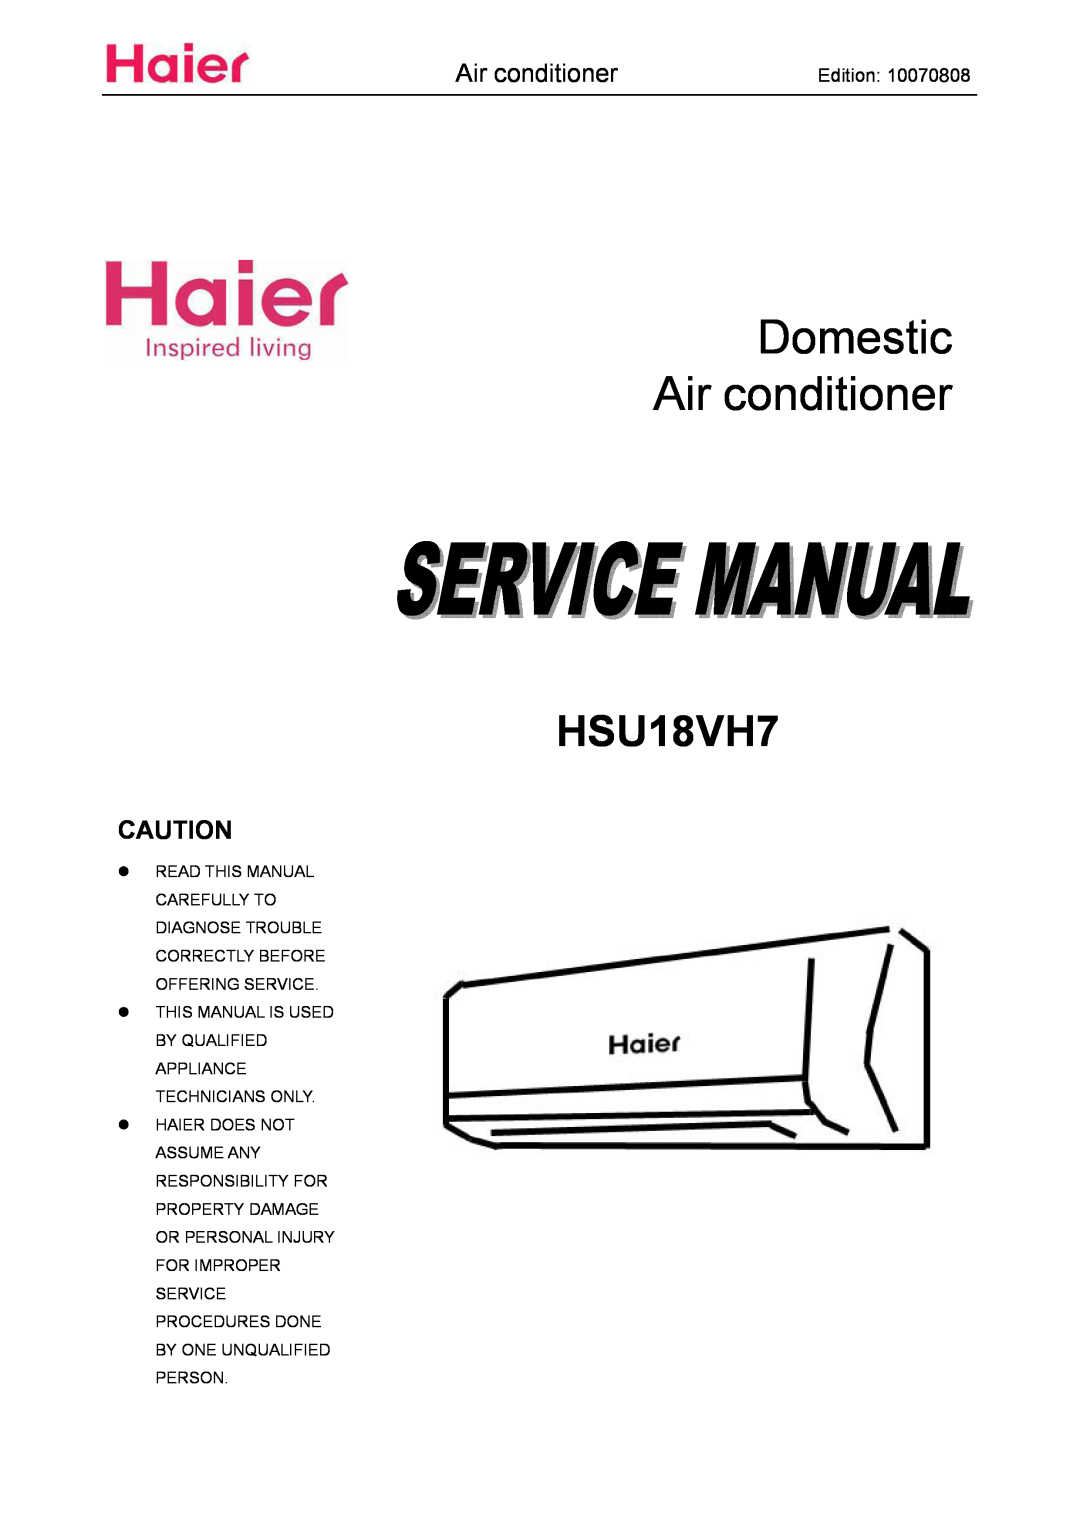 Haier HSU18VH7 manual Domestic Air conditioner, Edition, Read This Manual Carefully To Diagnose Trouble 